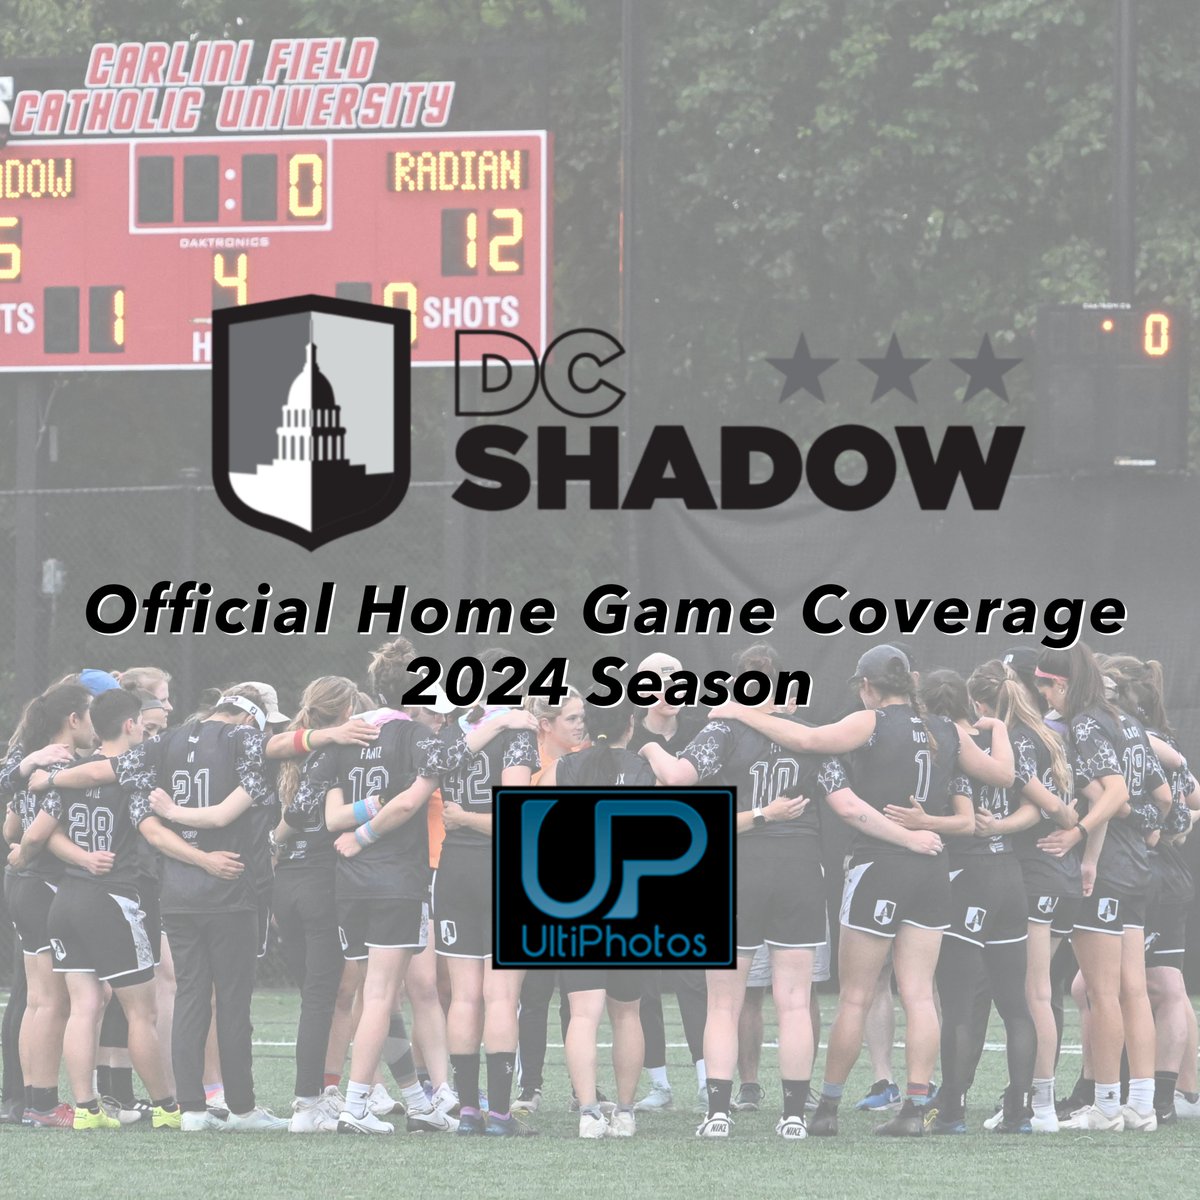 We are excited to announce that UltiPhotos will be providing Official Coverage for the DC Shadow at their 2024 season home games! 🌸🏛 @DCShadowUlti @PremierUltimate